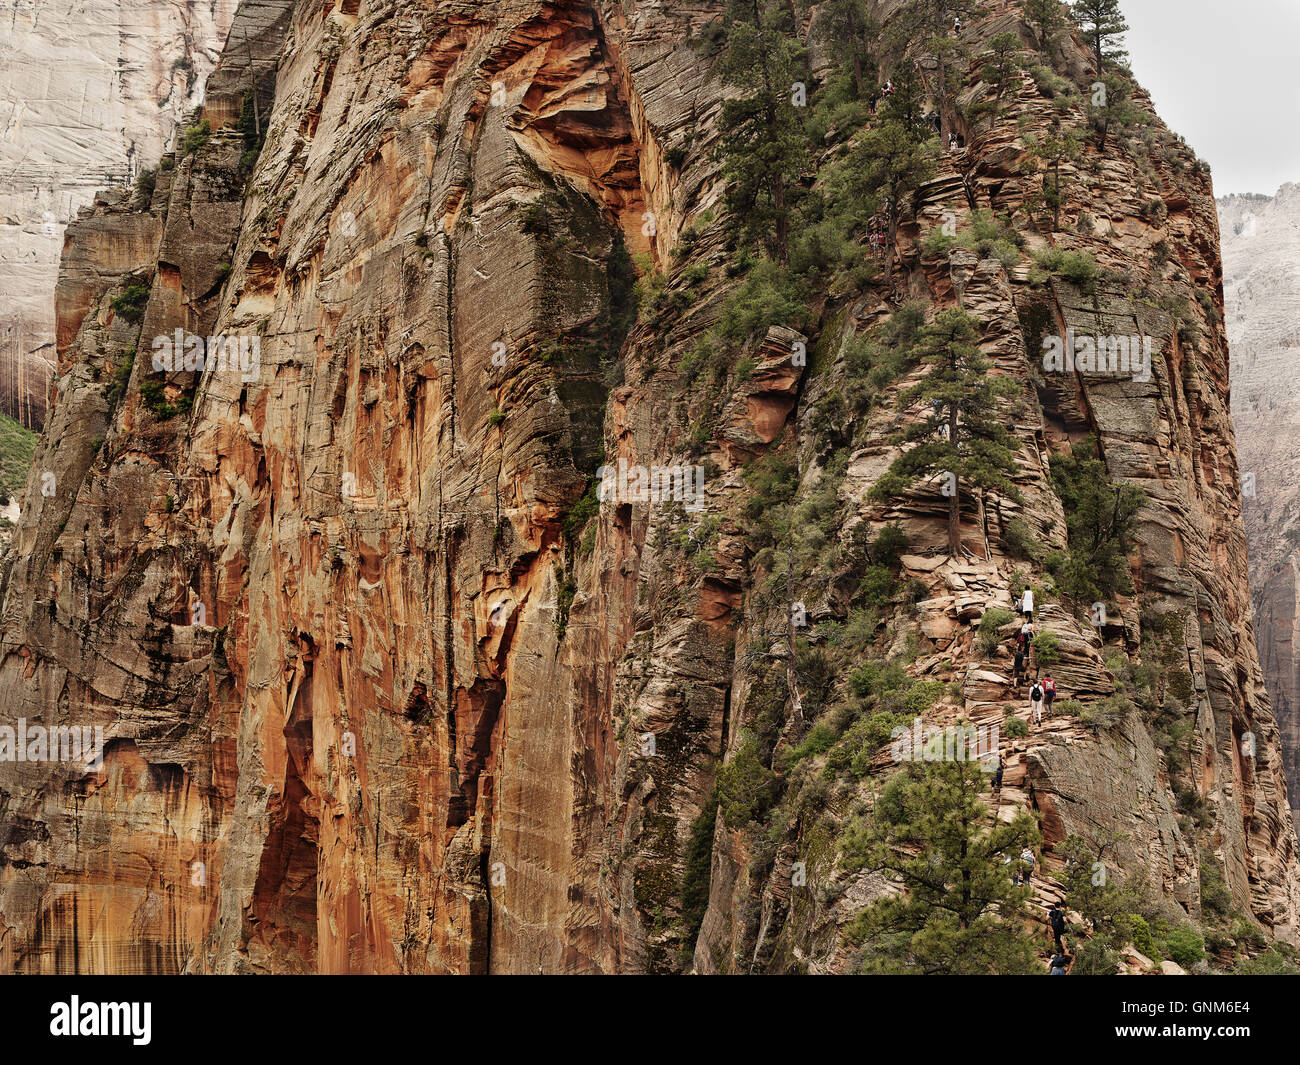 The face of a mountain in Utah's Zion National Park Stock Photo